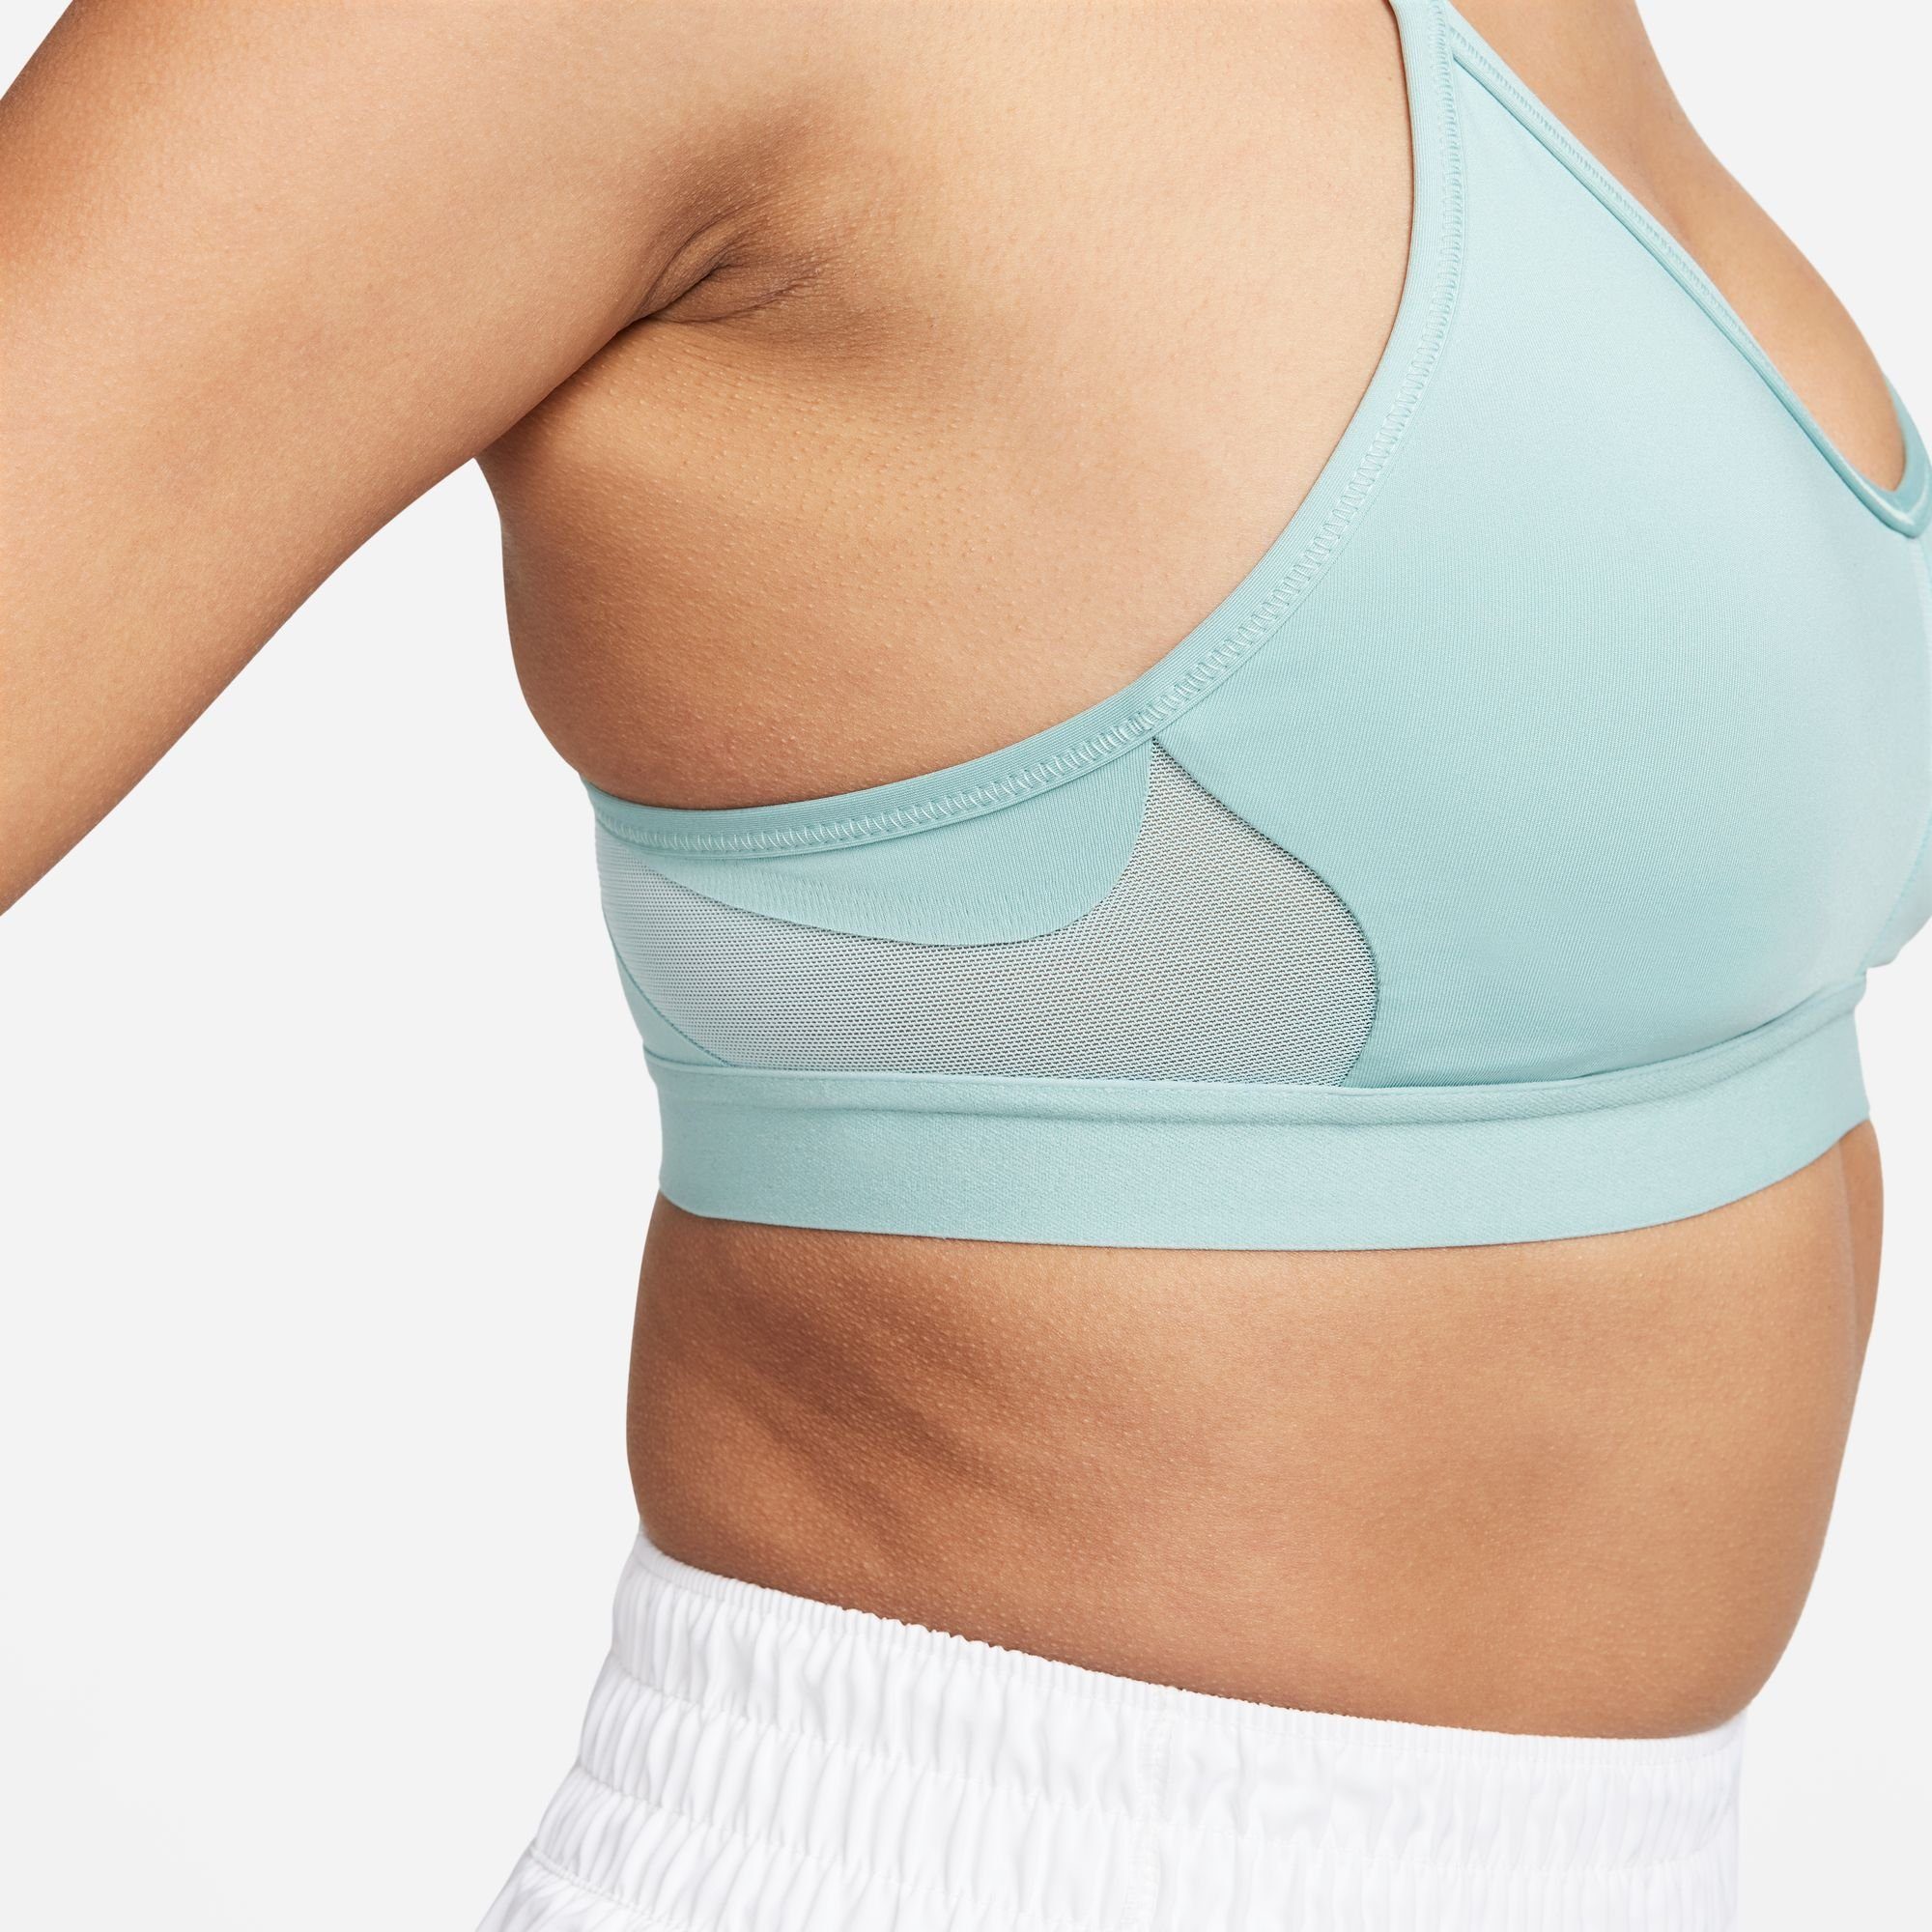 MINERAL/MINERAL/MINERAL/WHITE INDY LIGHT-SUPPORT WOMEN'S V-NECK BRA Sport-BH Nike SPORTS PADDED